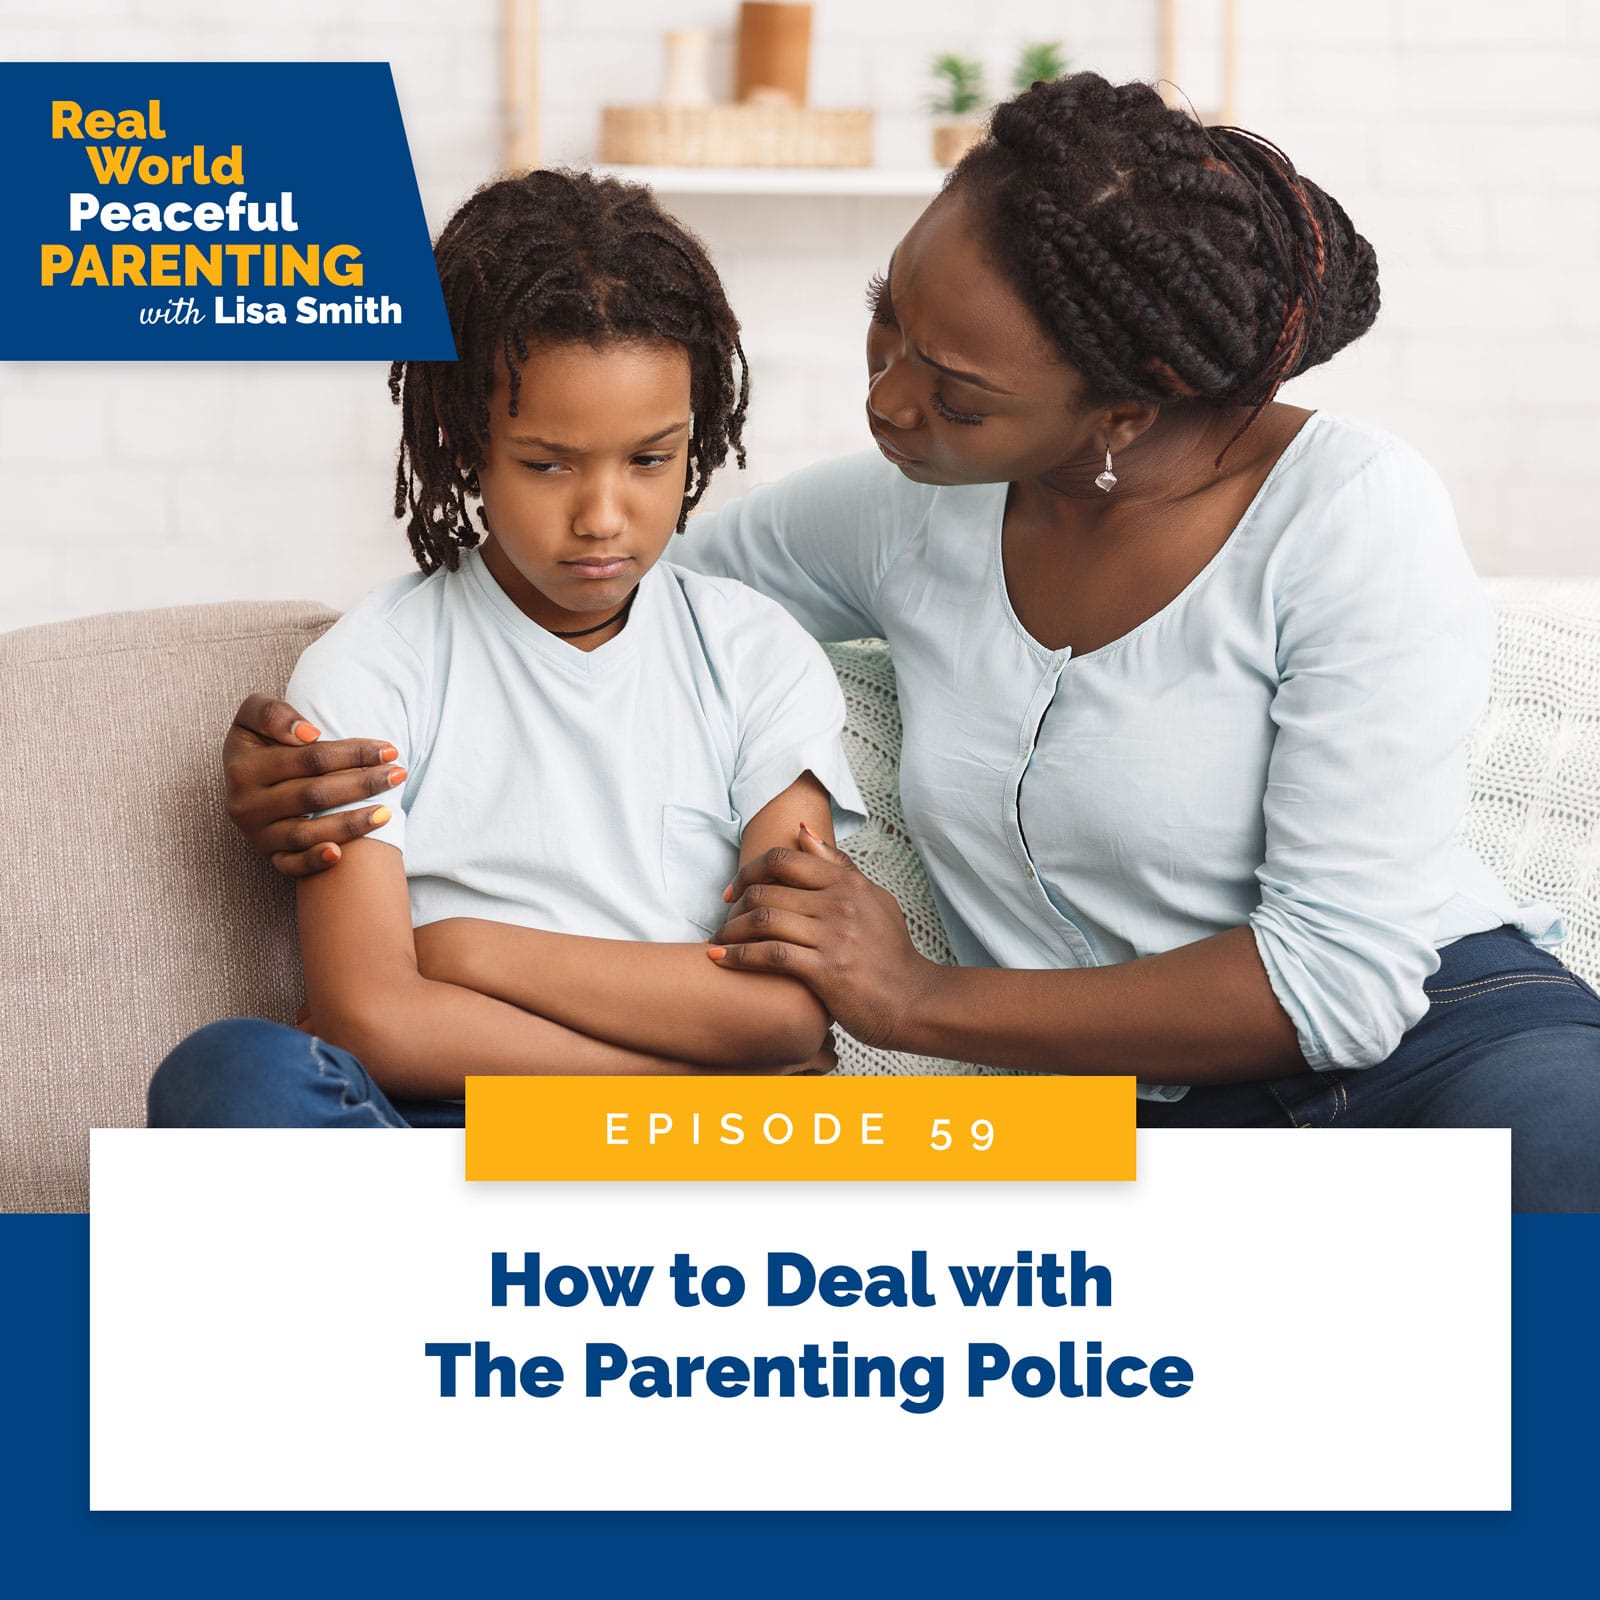 Real World Peaceful Parenting with Lisa Smith | How to Deal with The Parenting Police